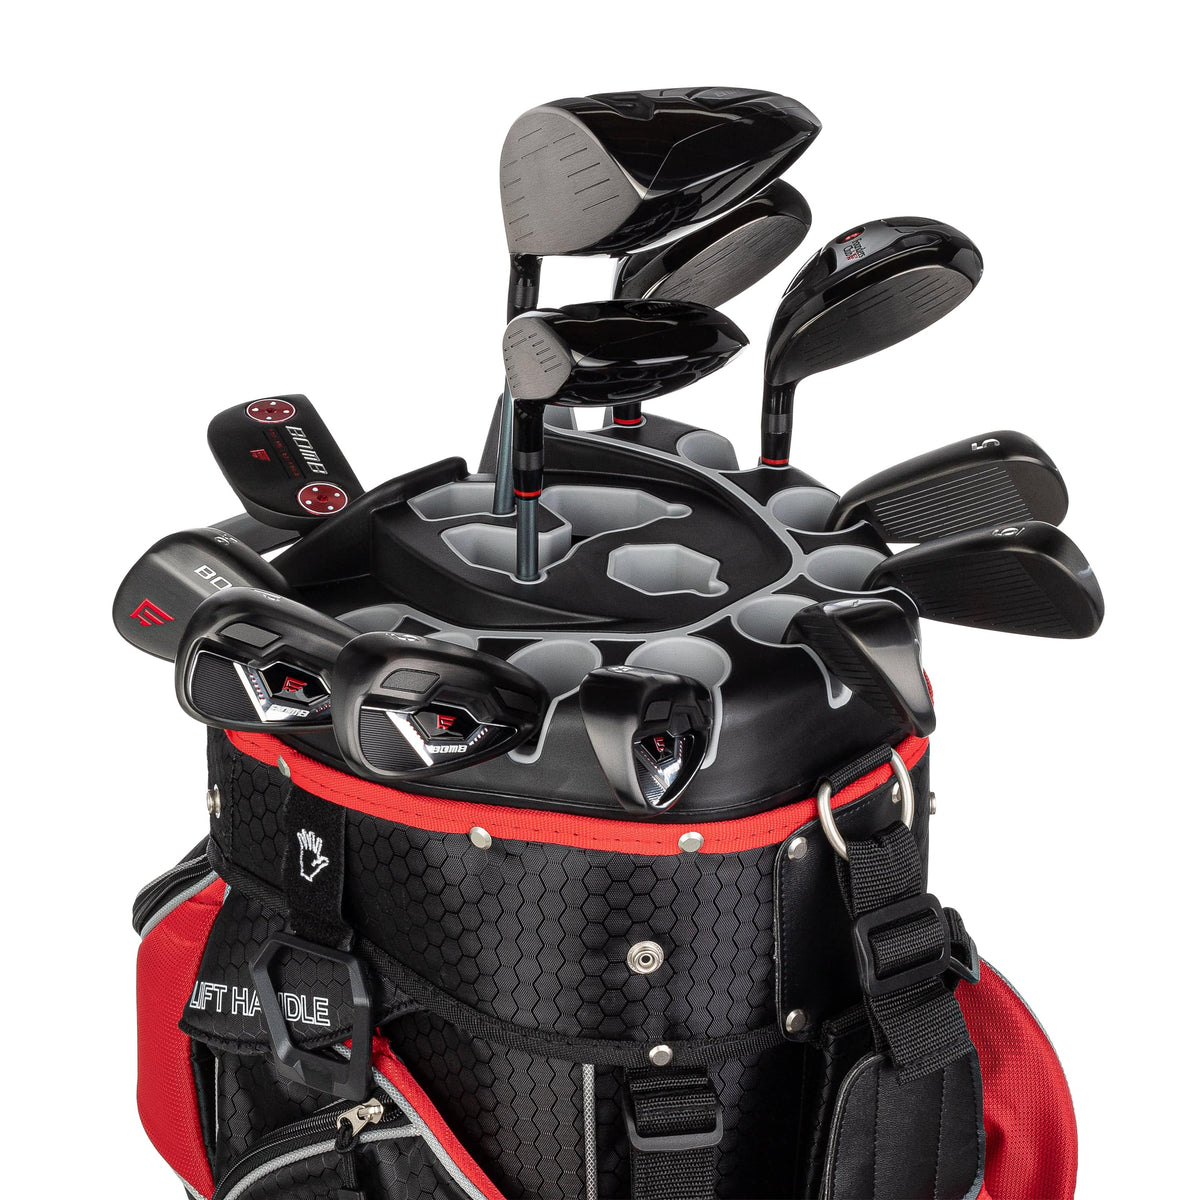 Founders Club Bomb Men&#39;s Golf Club Set with 14 Way Organizer Golf Red Bag Right Hand